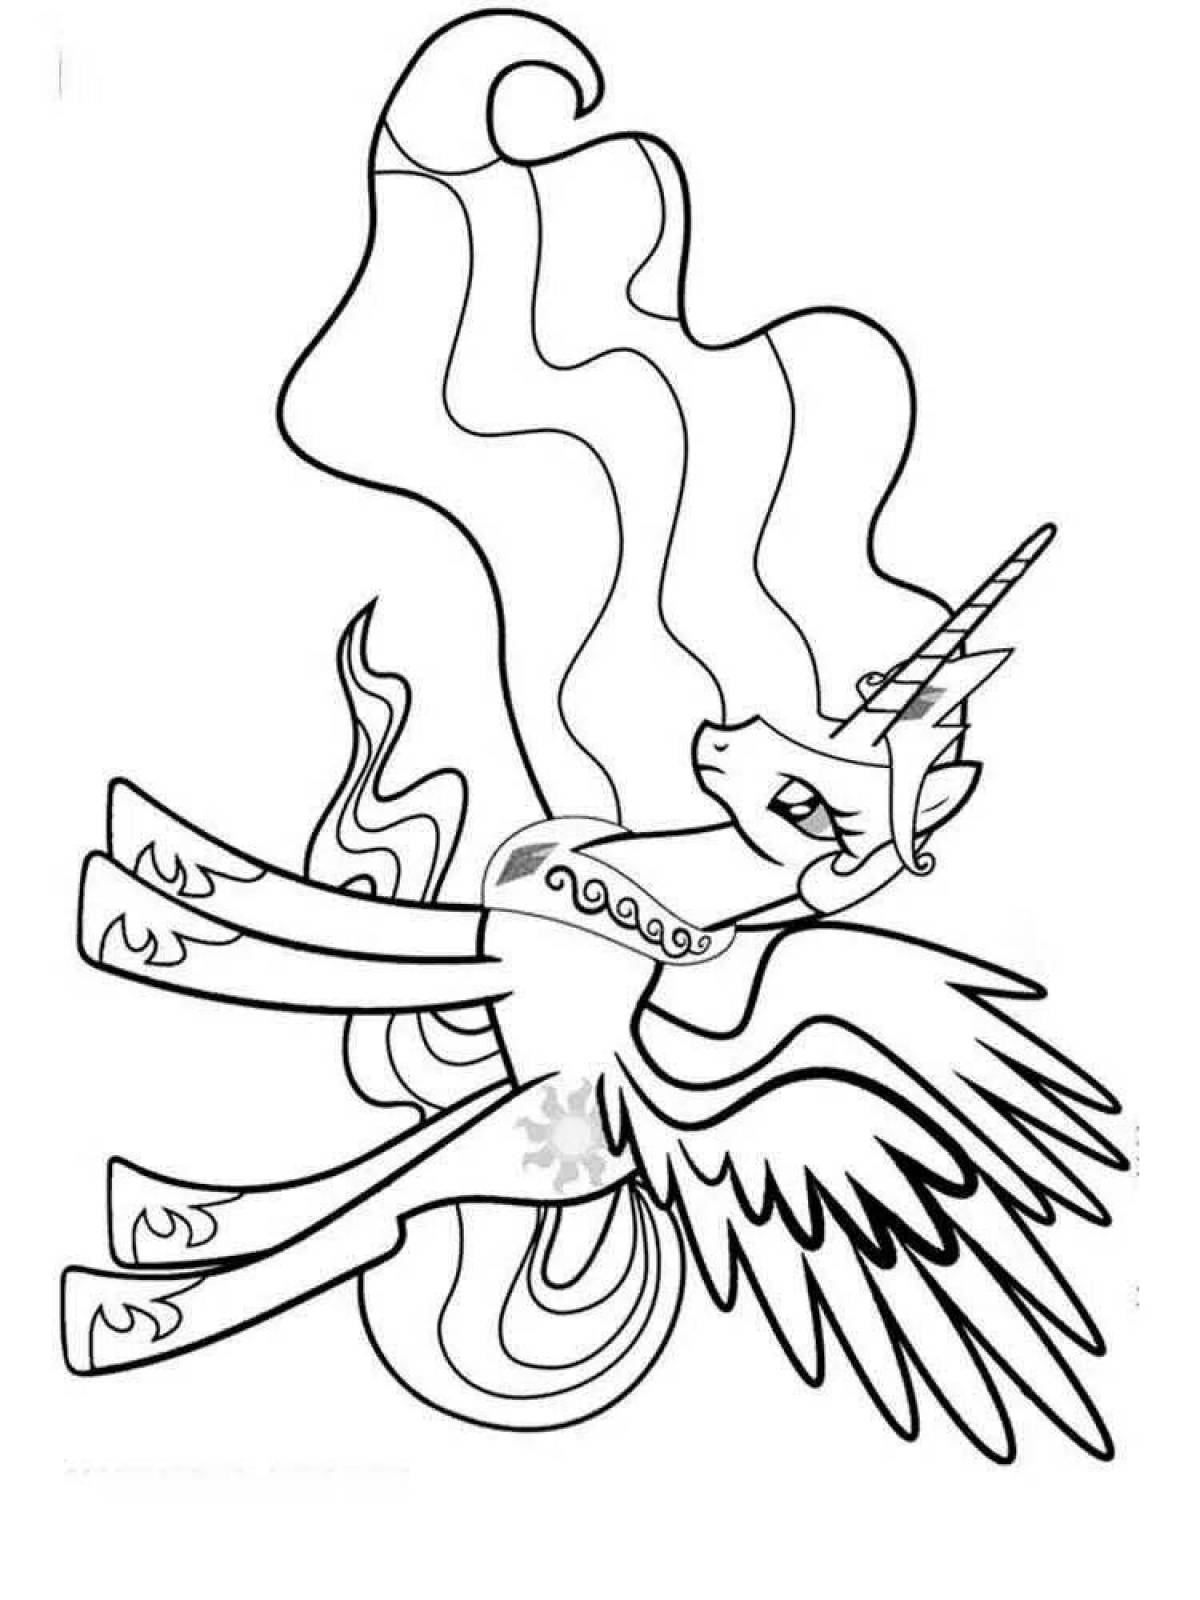 Celestia and the moon dazzling coloring book